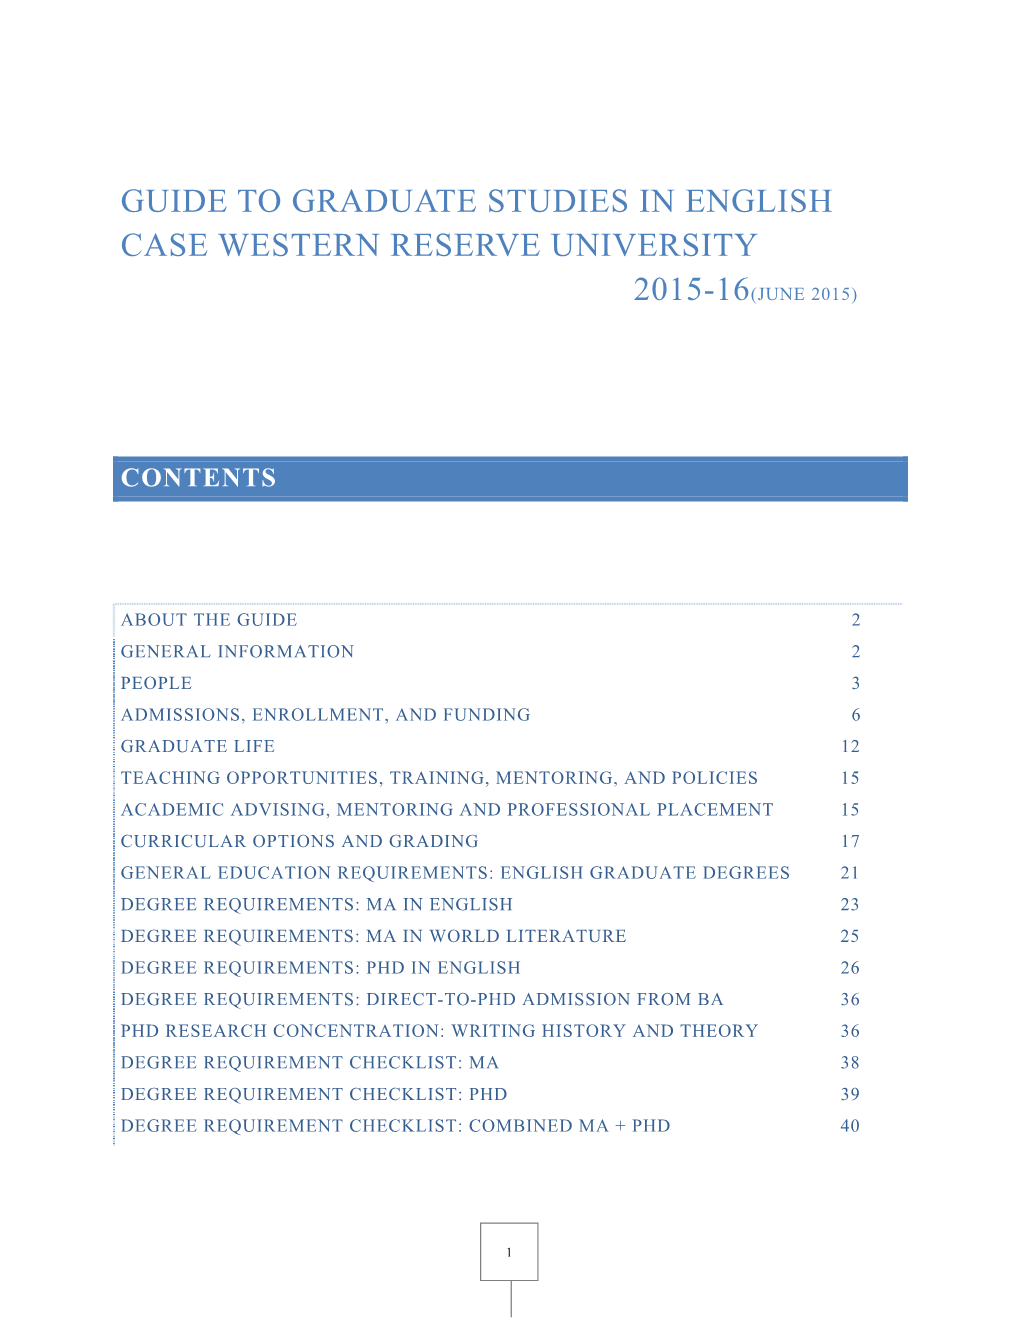 Guide to Graduate Studies in English Case Western Reserve University